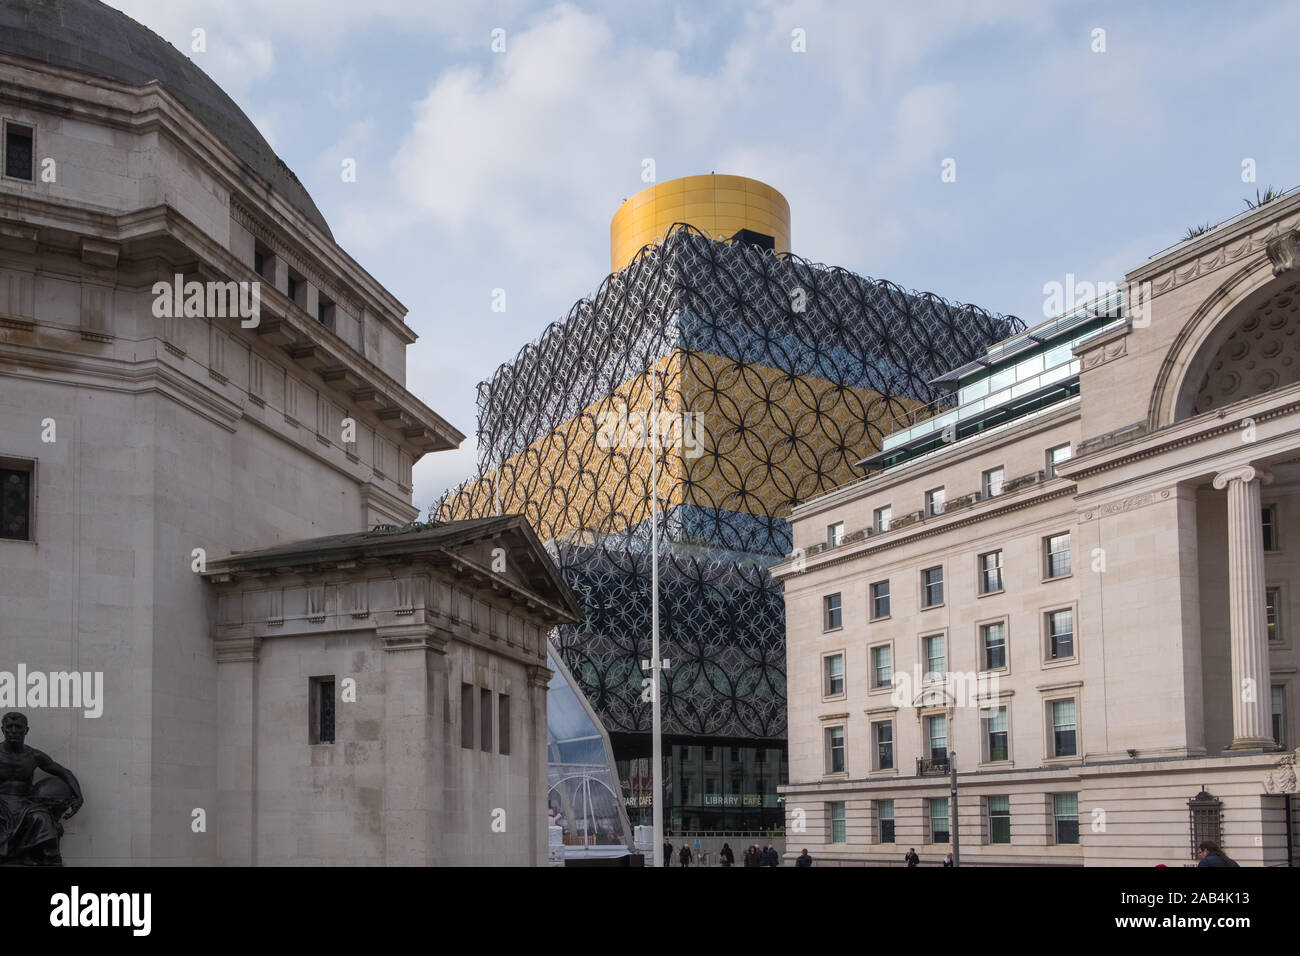 The Hall of Memory, Library of Birmingham and Baskerville House in Centenary Square, Birmingham, UK Stock Photo